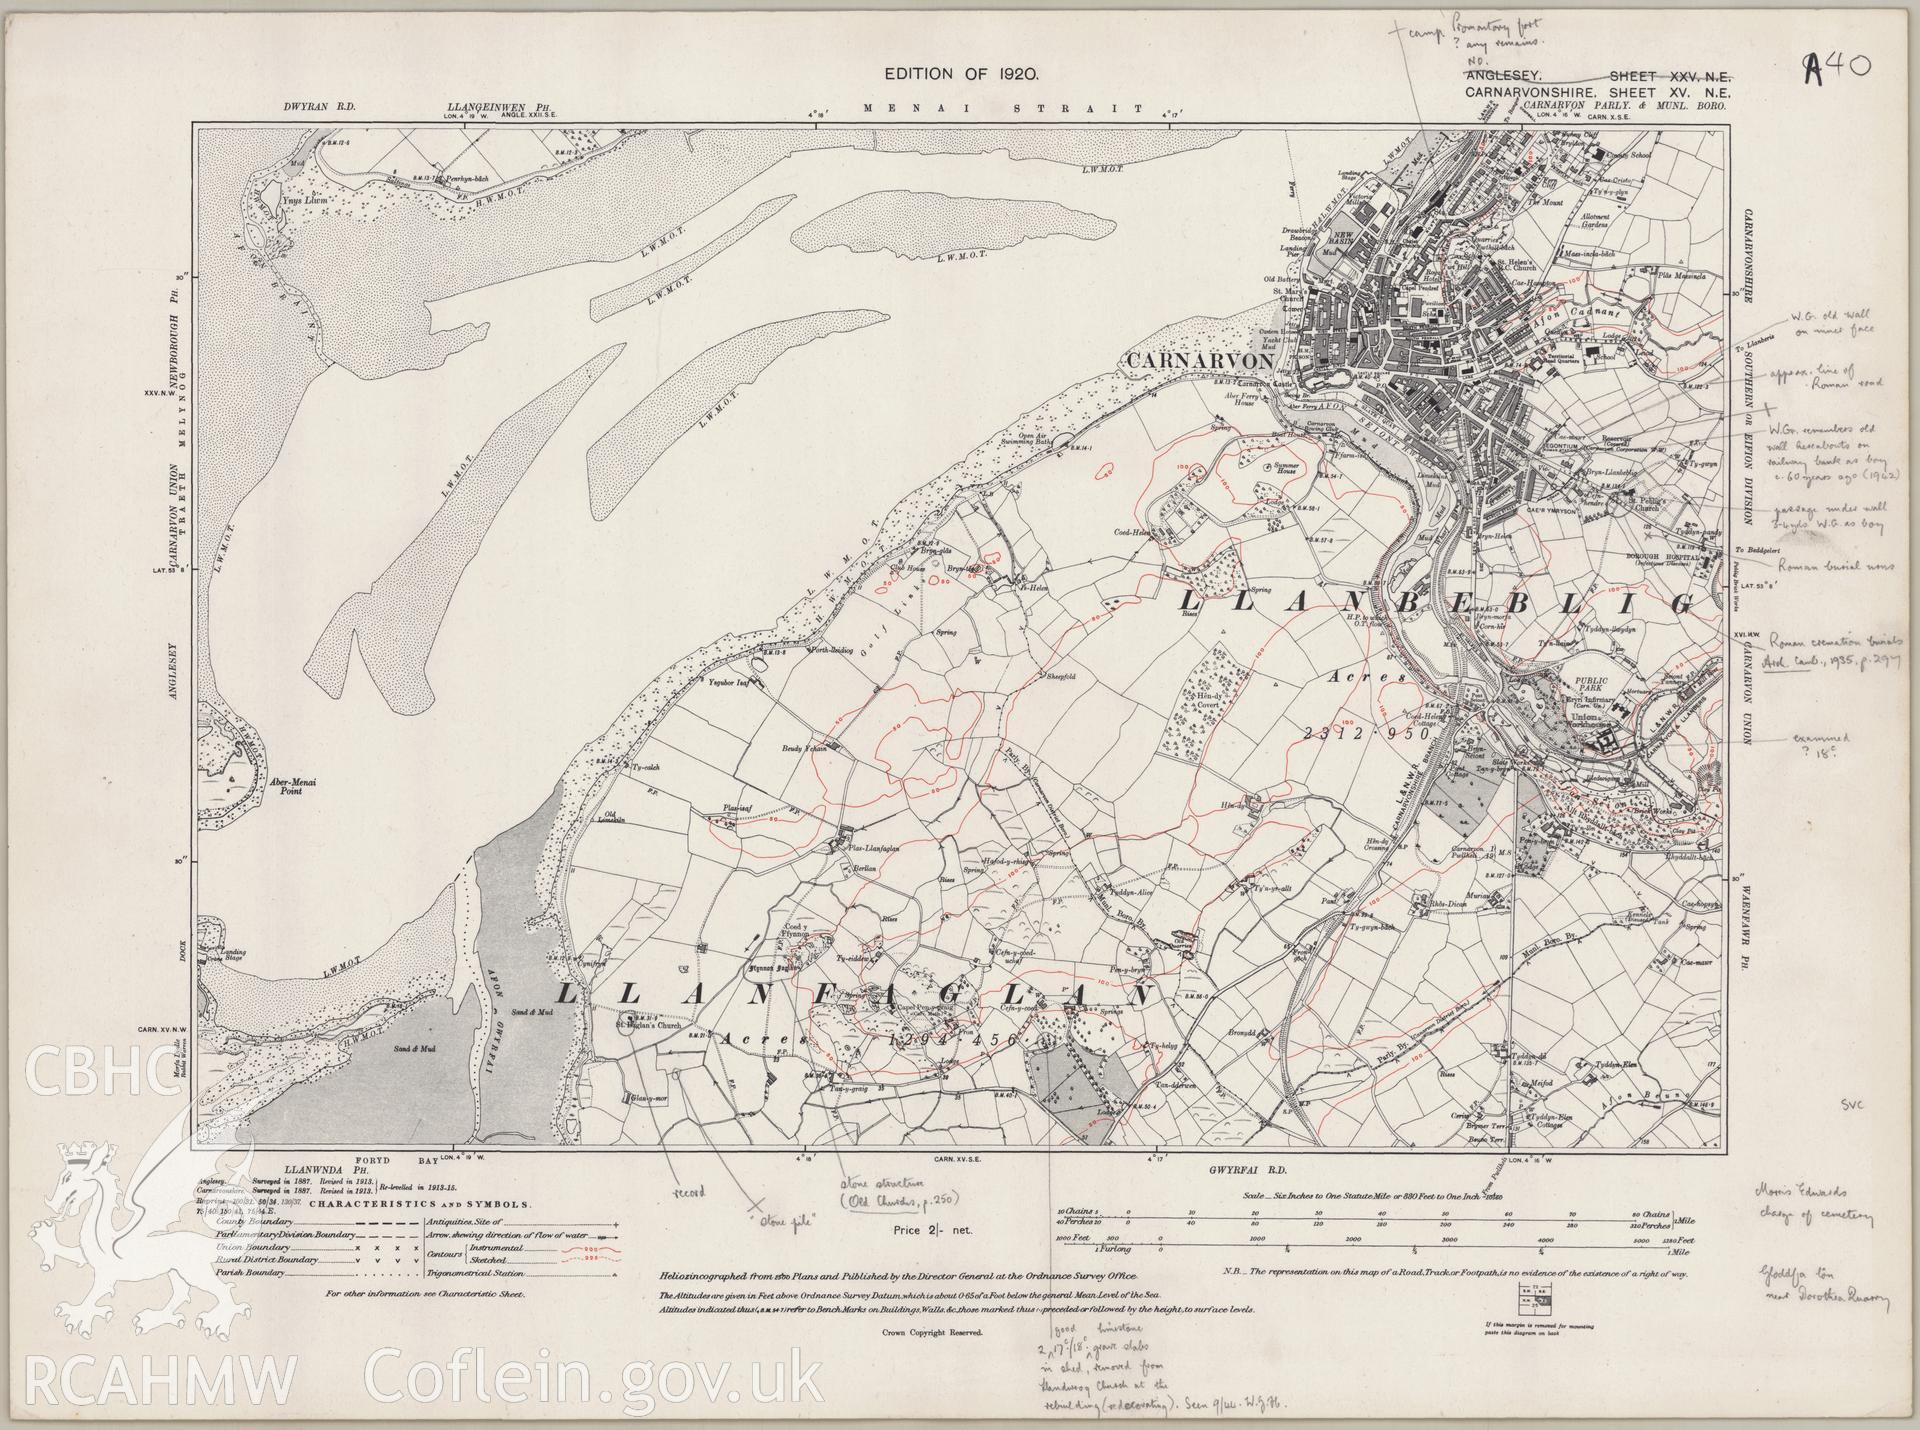 Digital copy of an Ordnance Survey six inch map reference number CA.XV.NE, dated 1920, showing Caerarfon area.